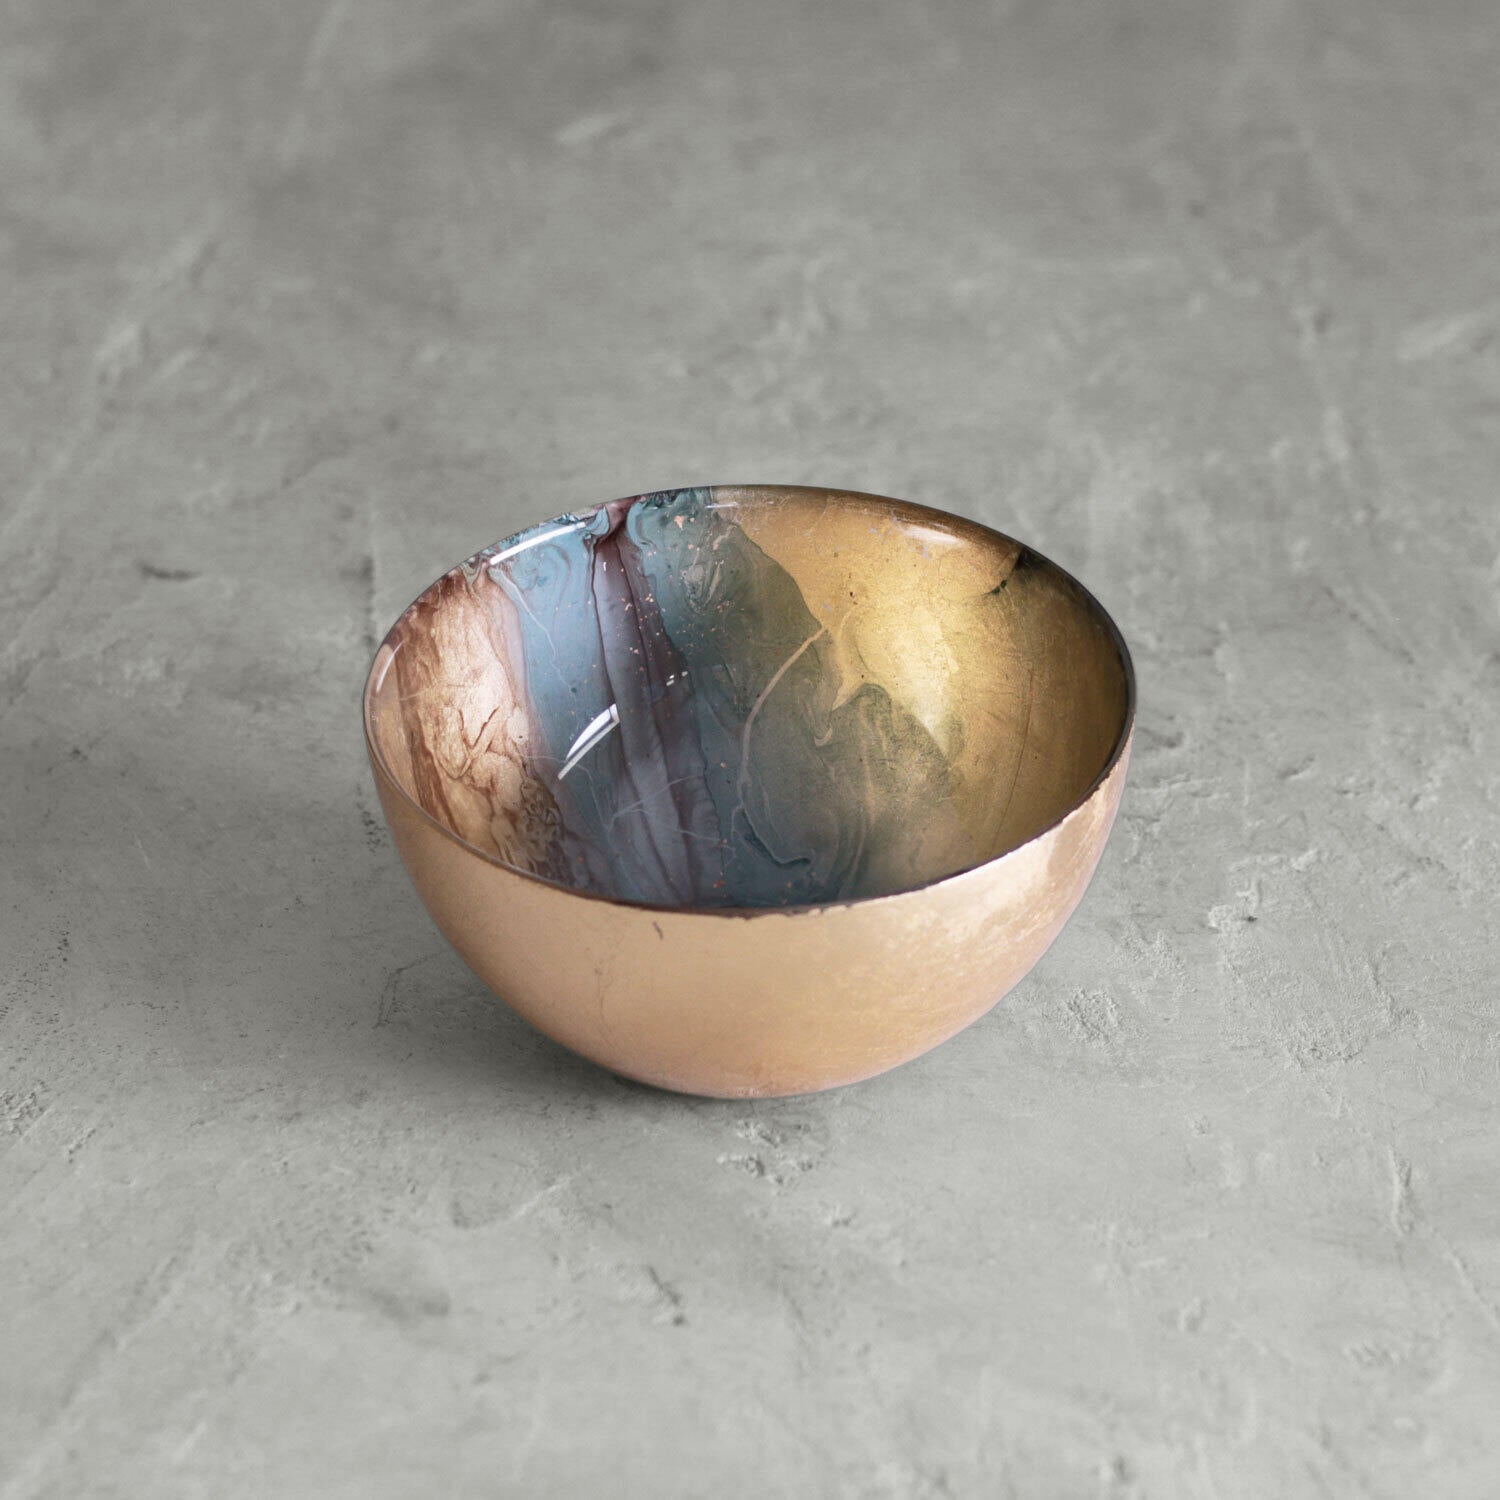 New Orleans Small Foil Leafing Bowl (Light Teal & Gold) by Beatriz Ball